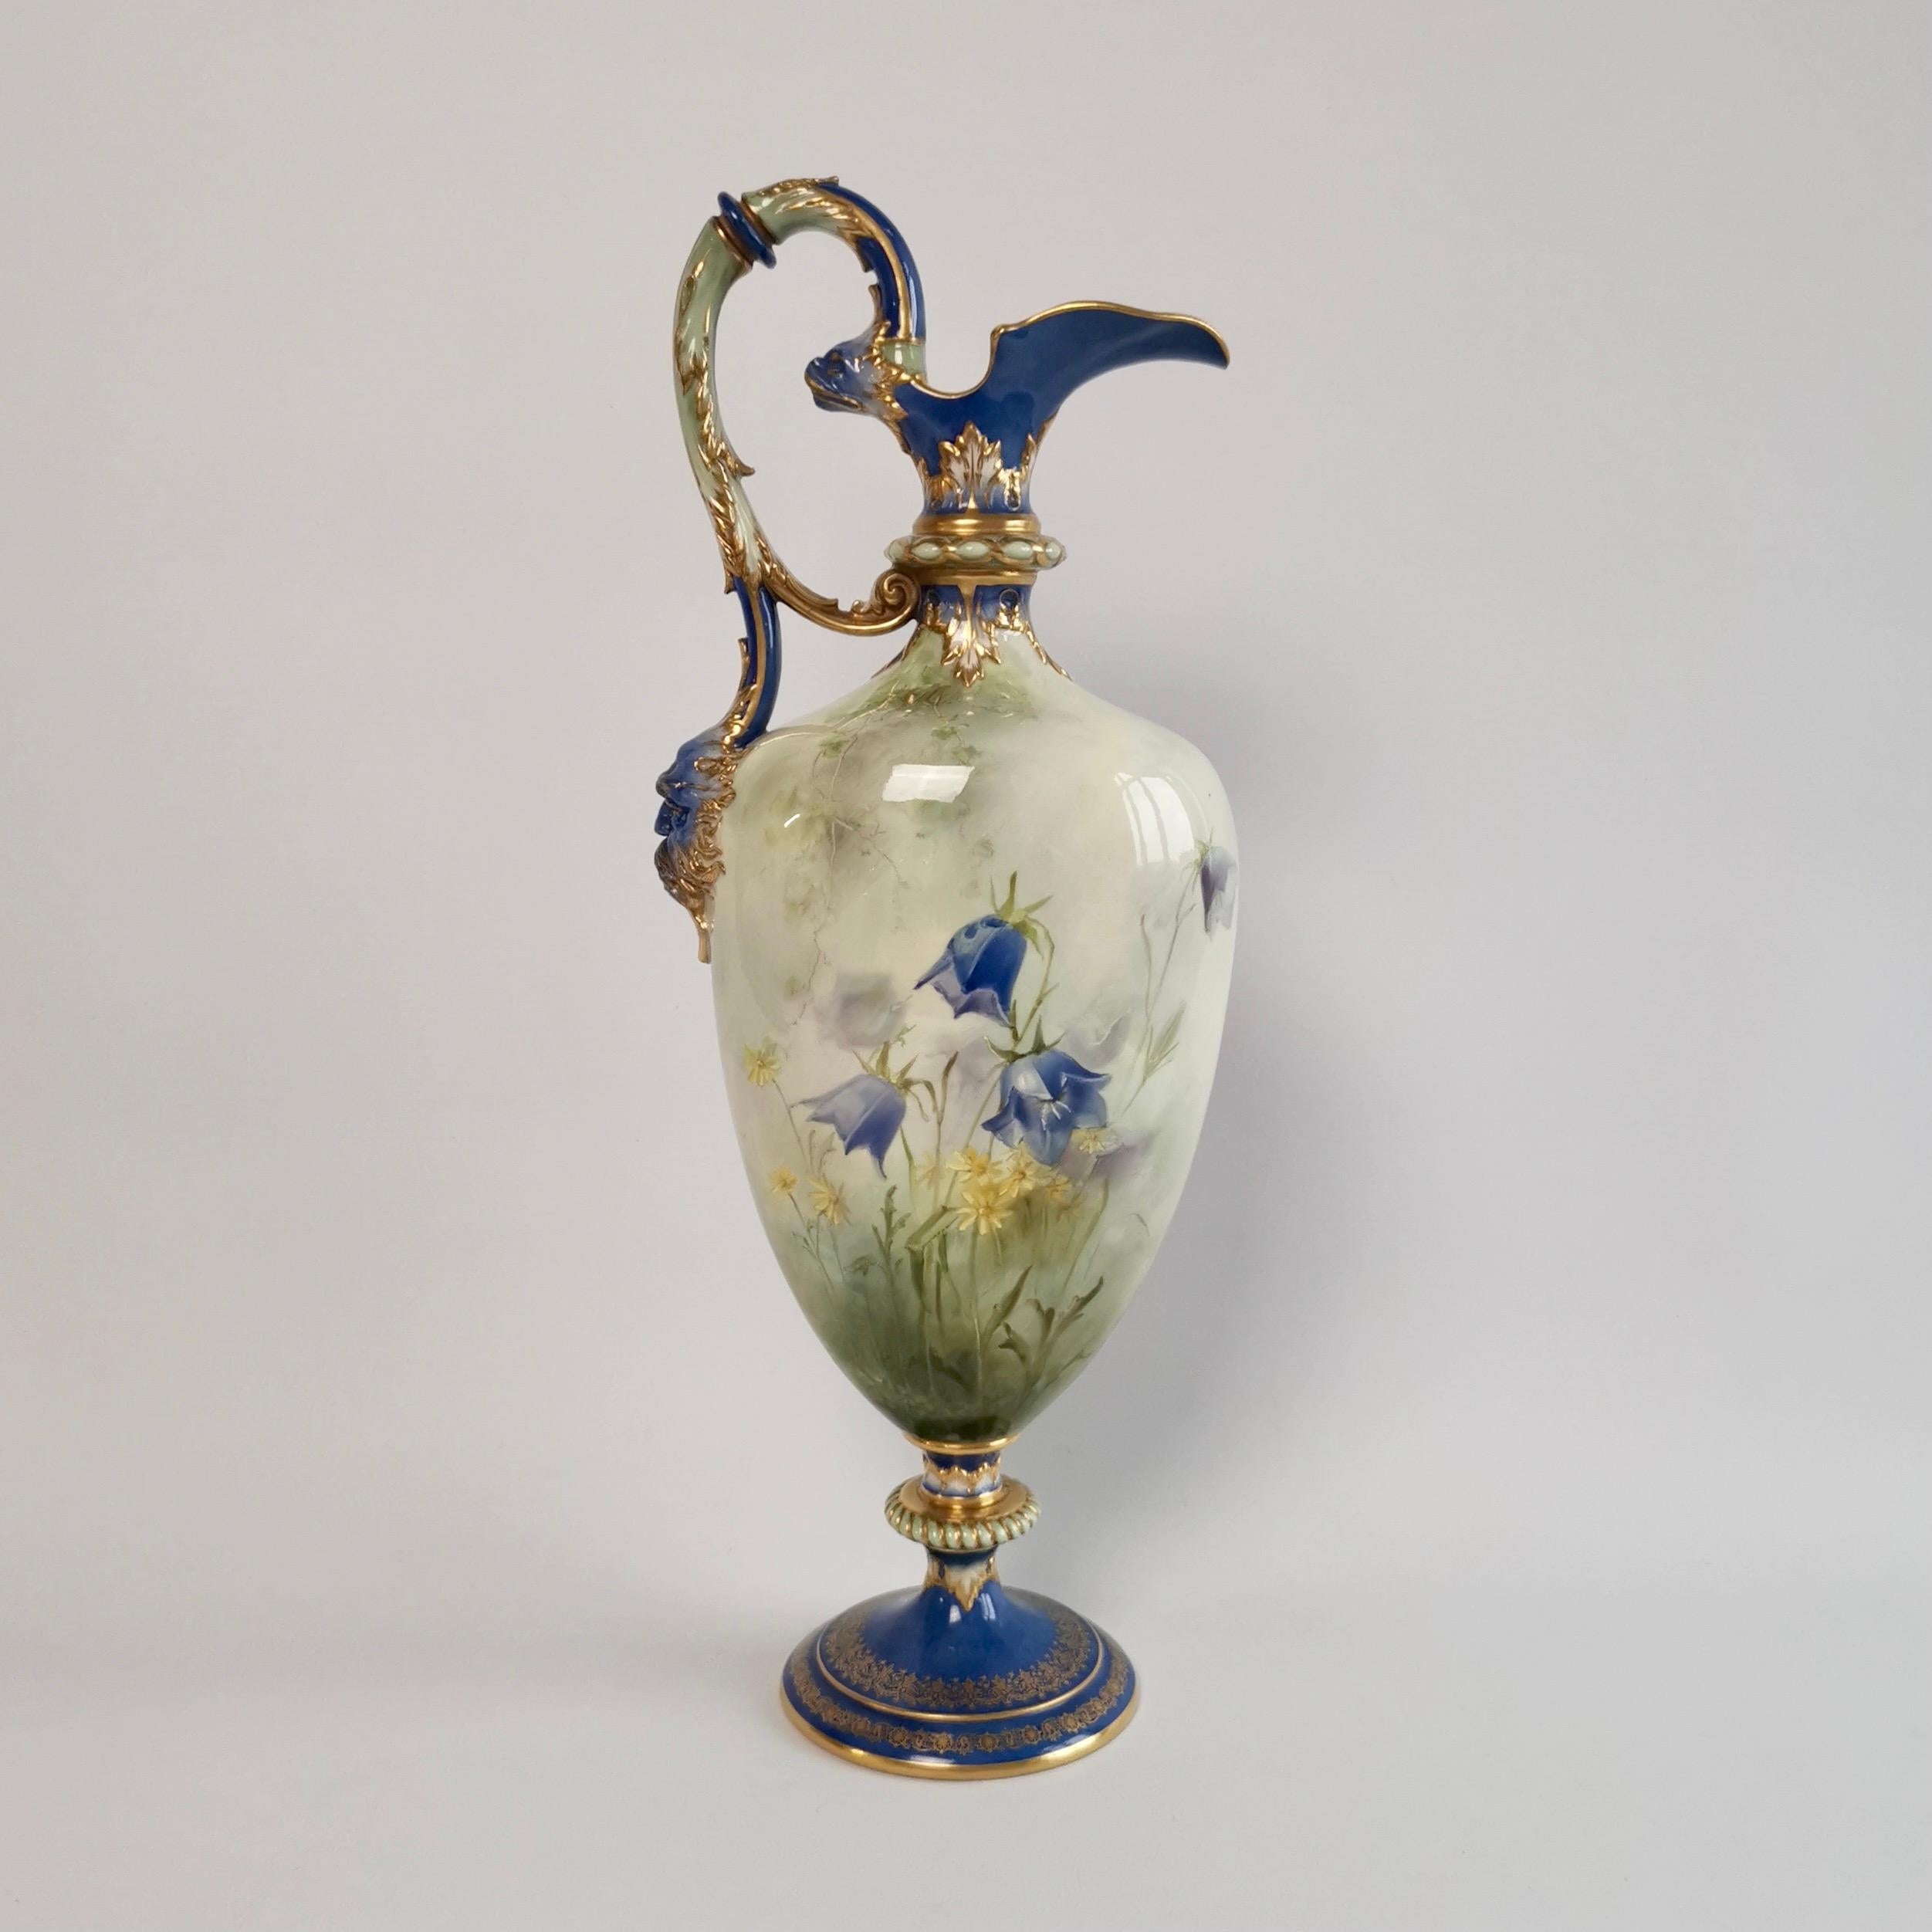 Victorian Royal Worcester Porcelain Ewer, Hand Painted Flowers by F. Roberts, 1901